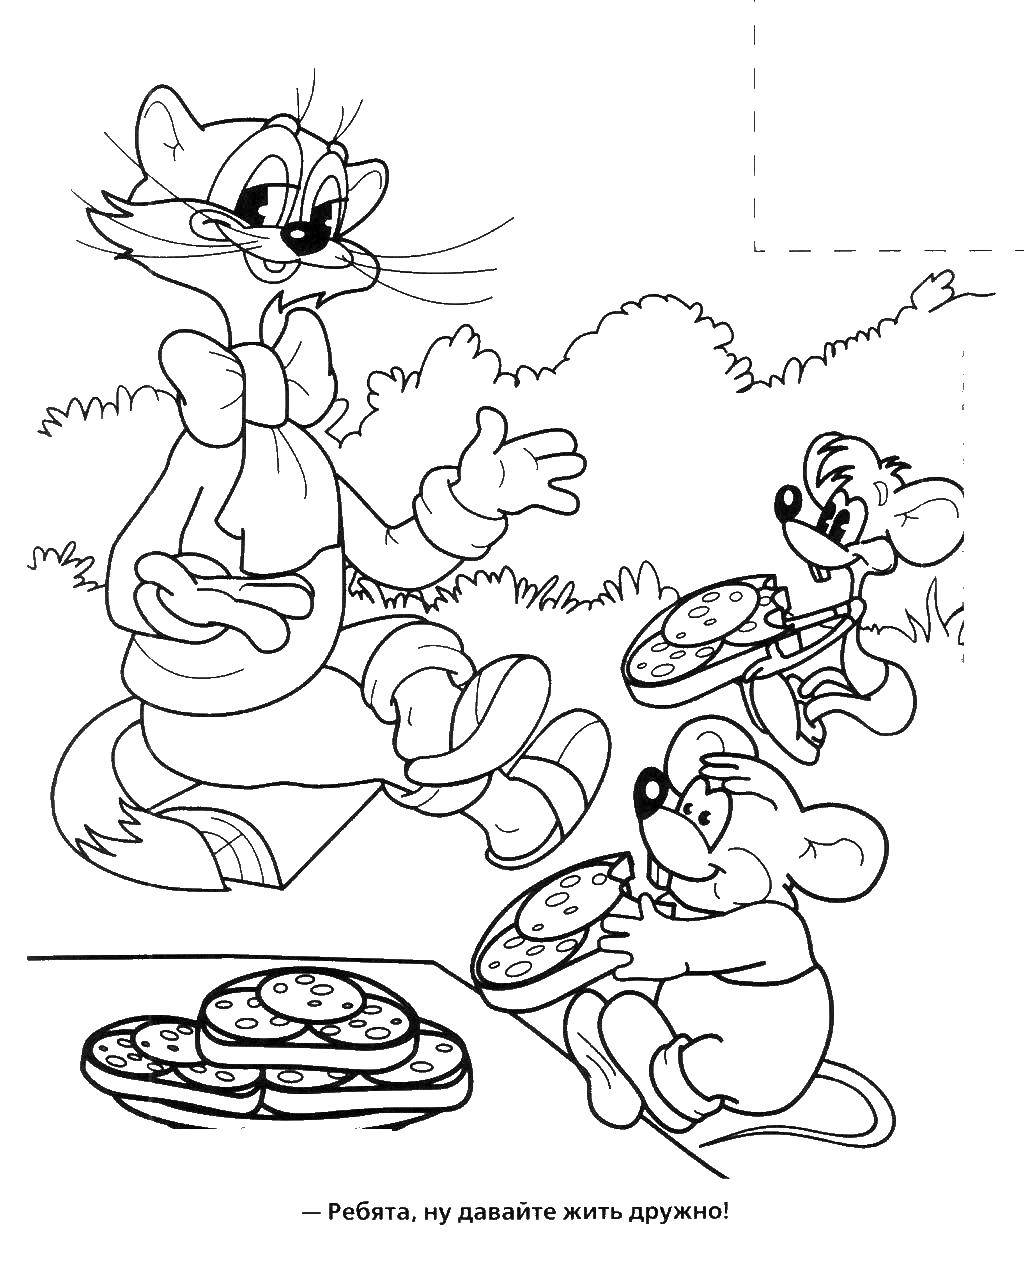 Coloring Leopold the cat and mouse at the picnic. Category coloring cat Leopold. Tags:  cat Leopold.